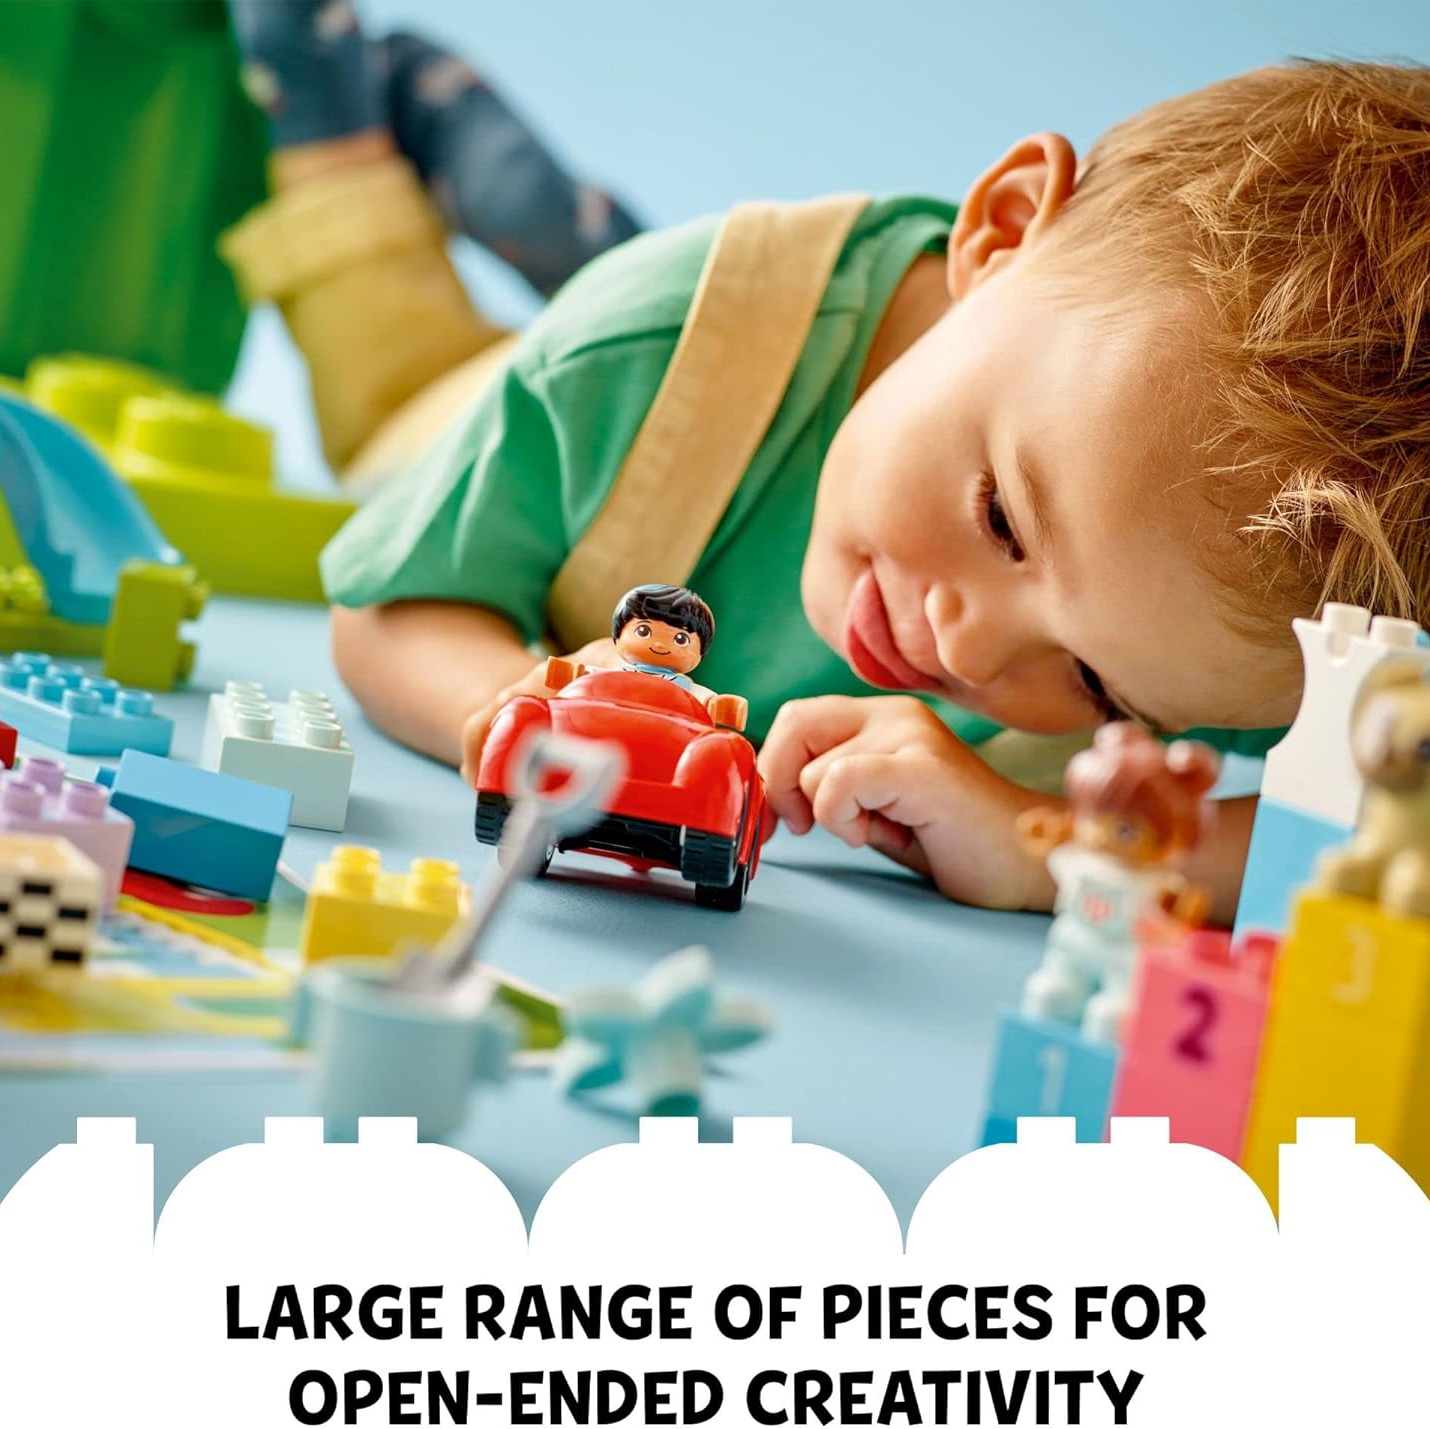 The 50 Bestselling Lego Sets for Kids Available on Amazon